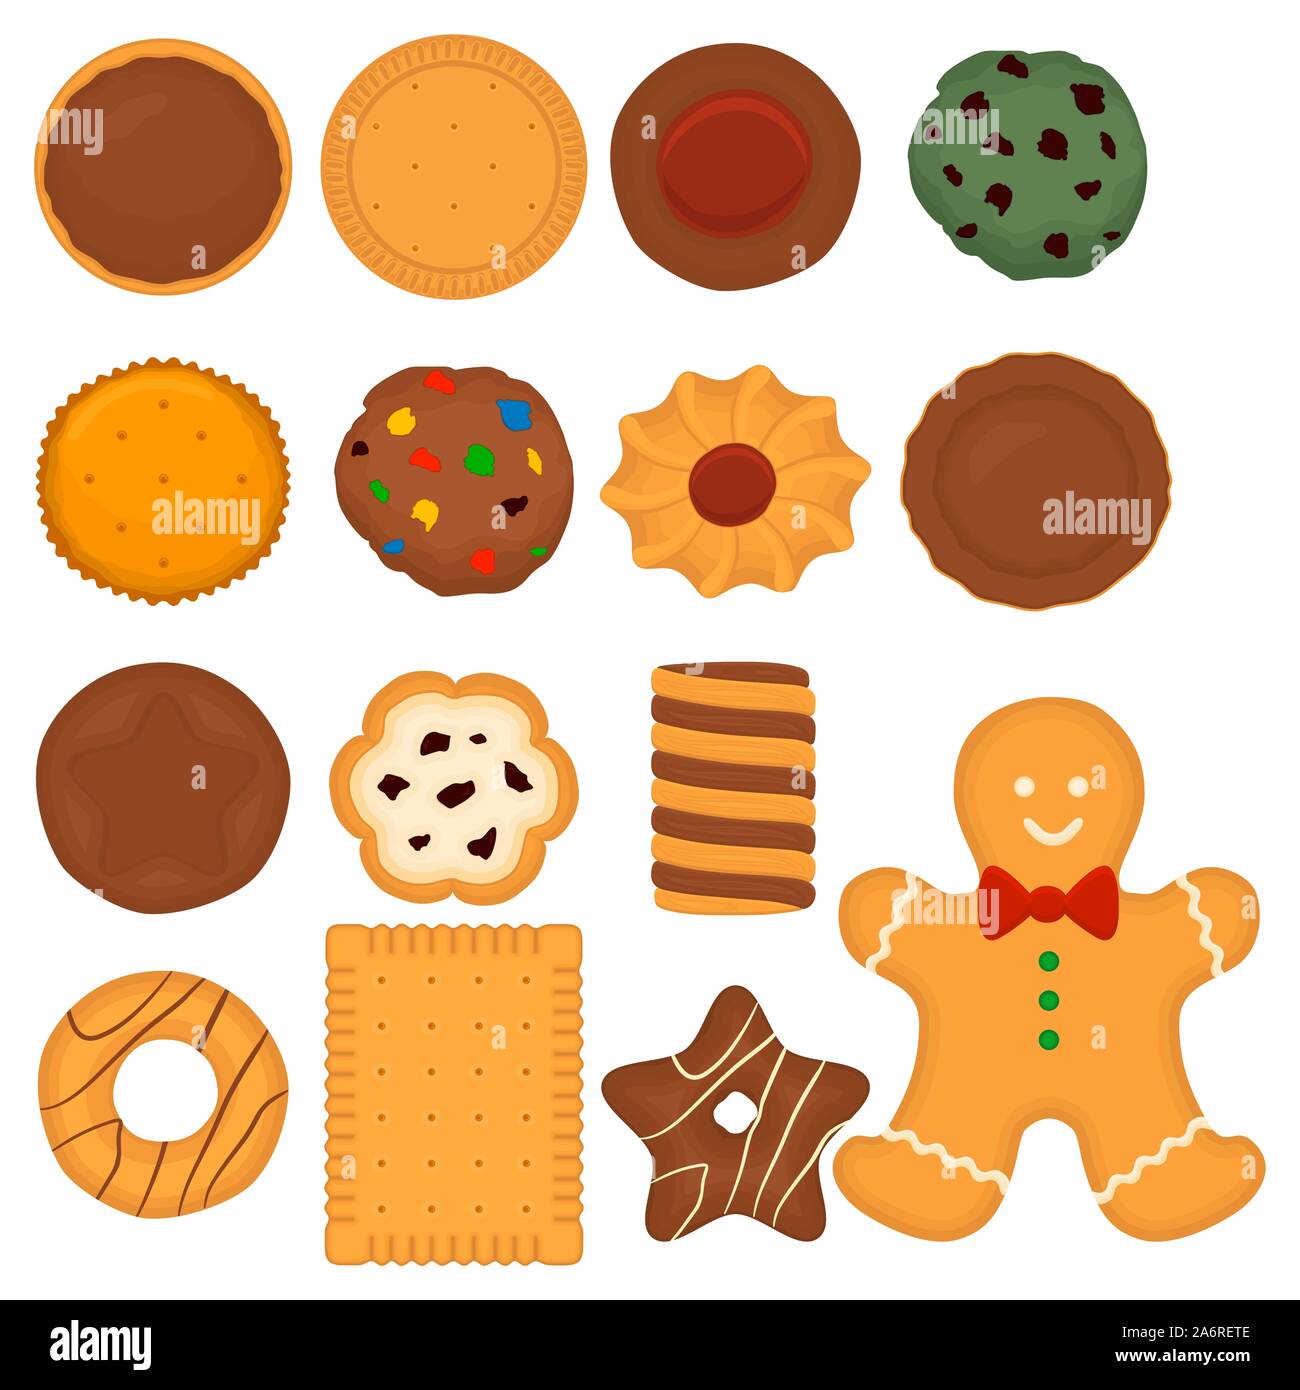 Illustration on theme big set different biscuit, kit colorful pastry cookie. Cookie consisting of collectible natural tasty food biscuit, pastry acces Stock Vector